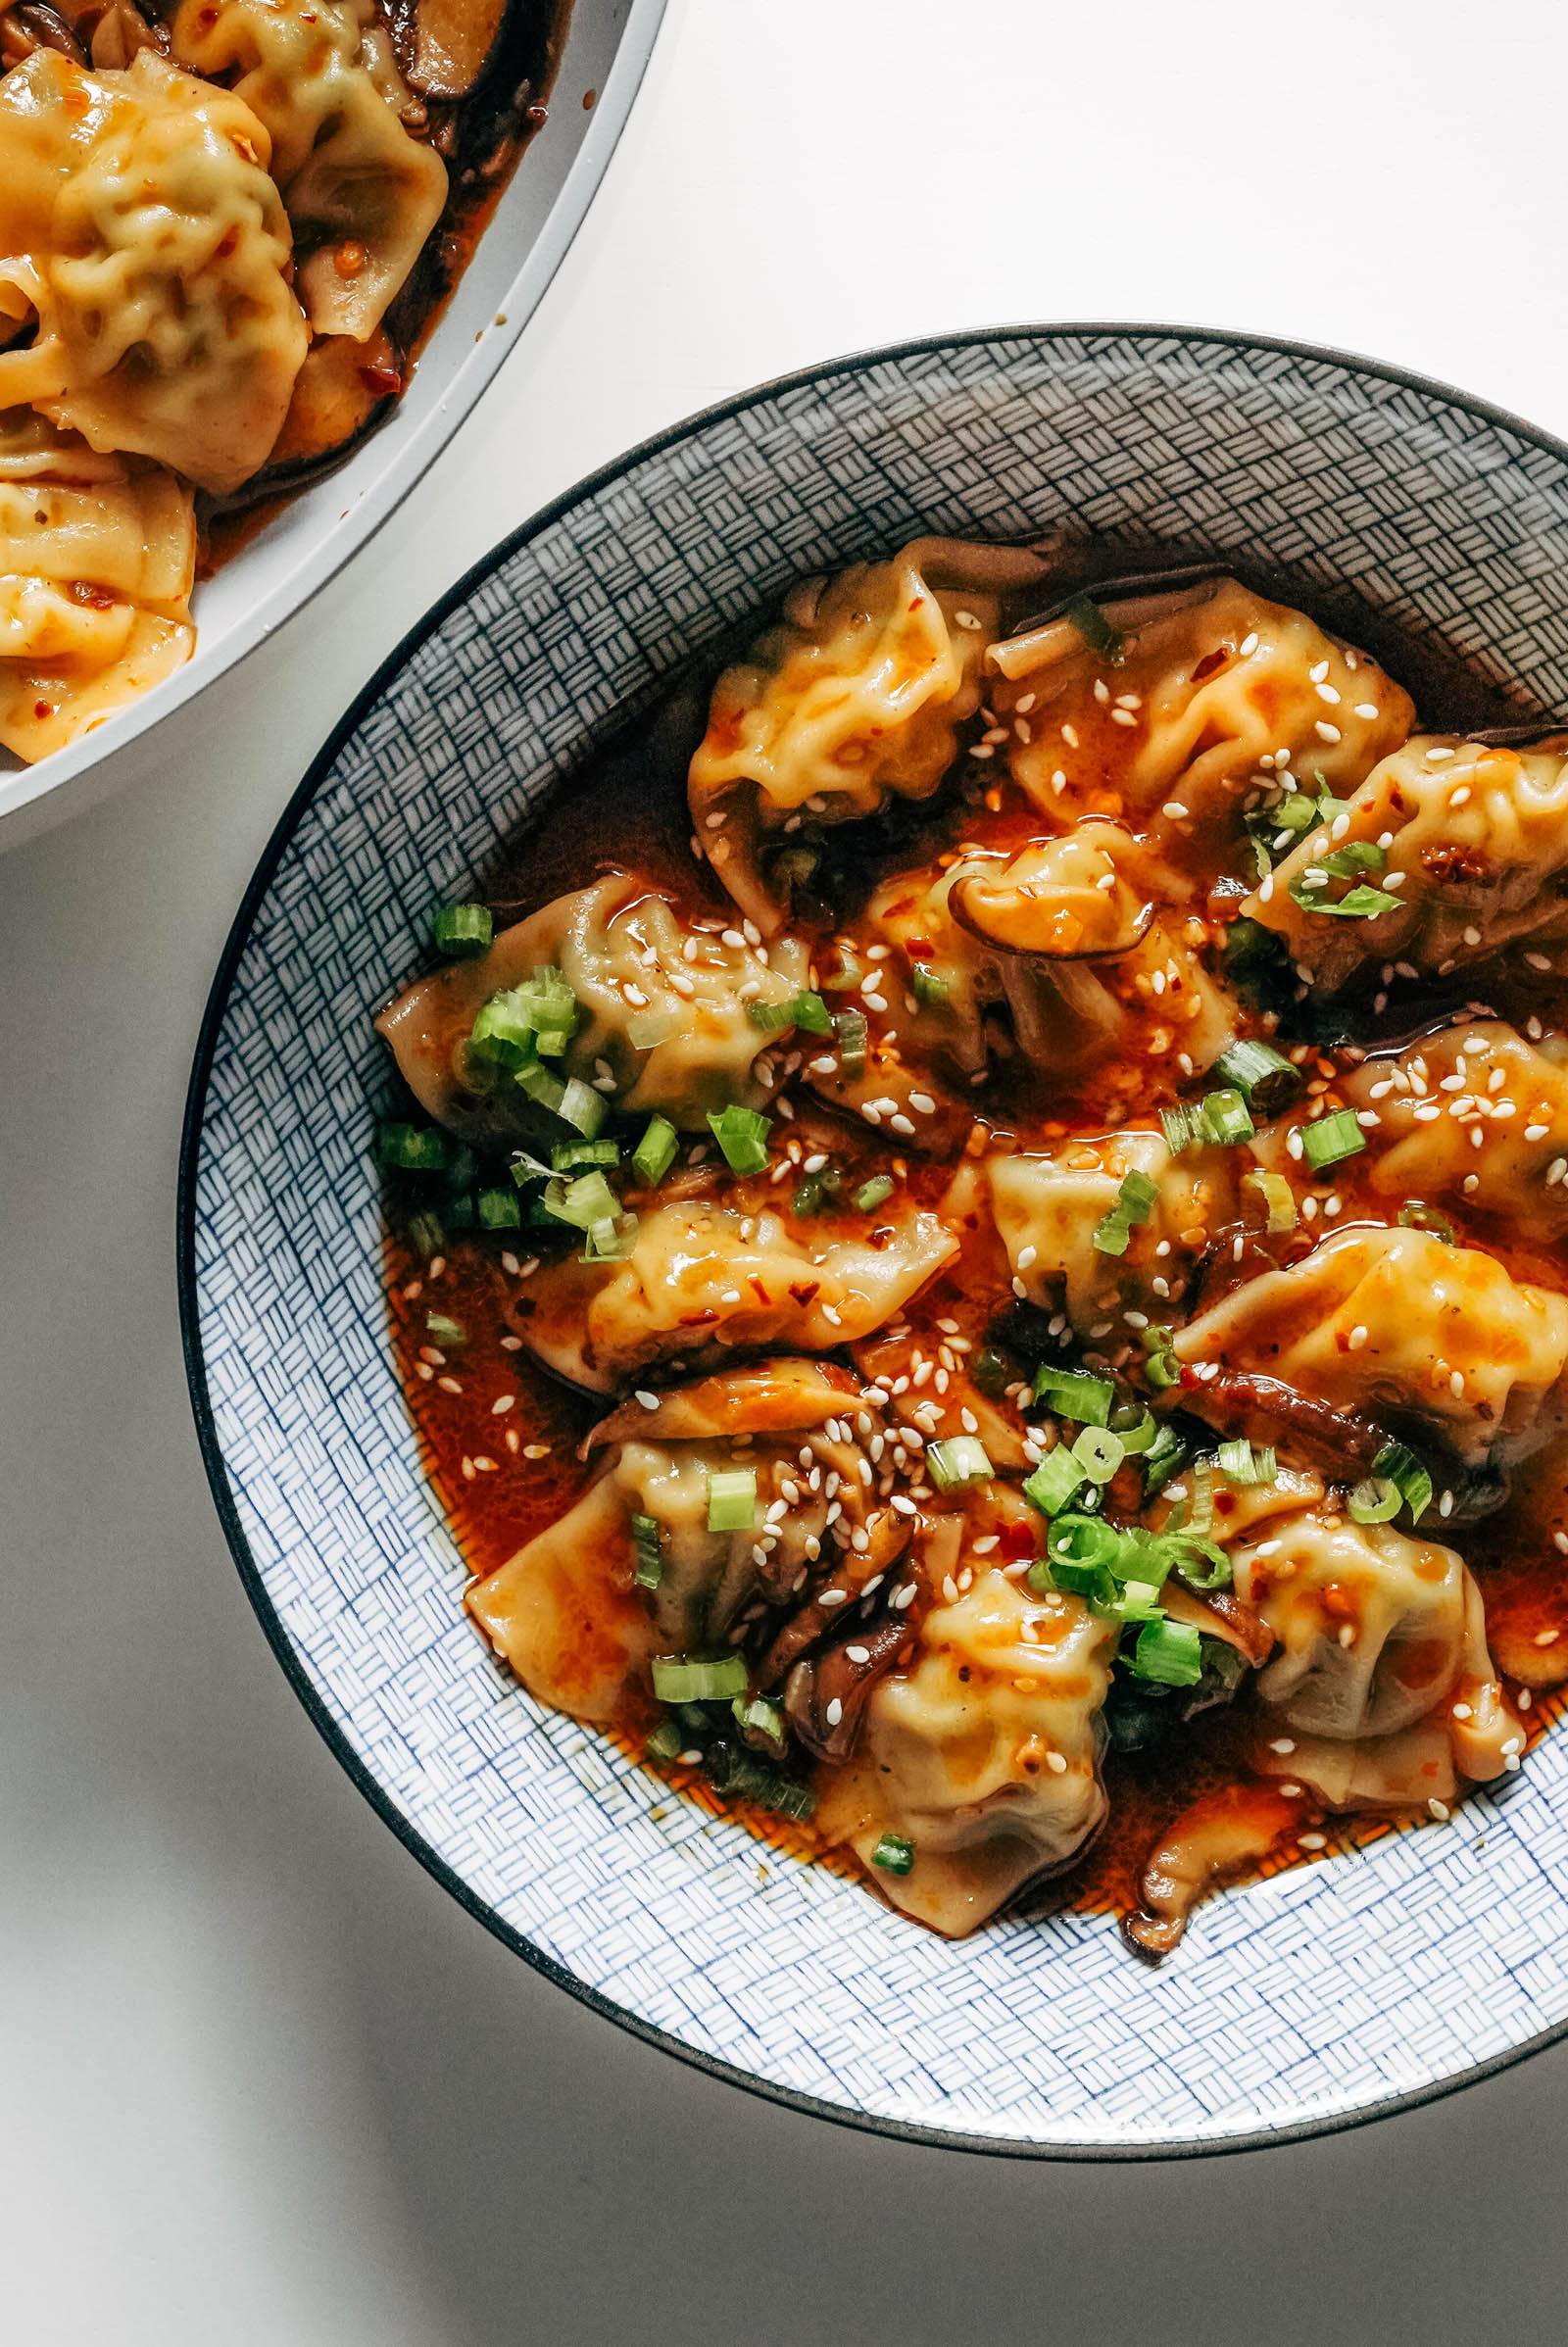 Chicken wontons in a spicy chili broth 